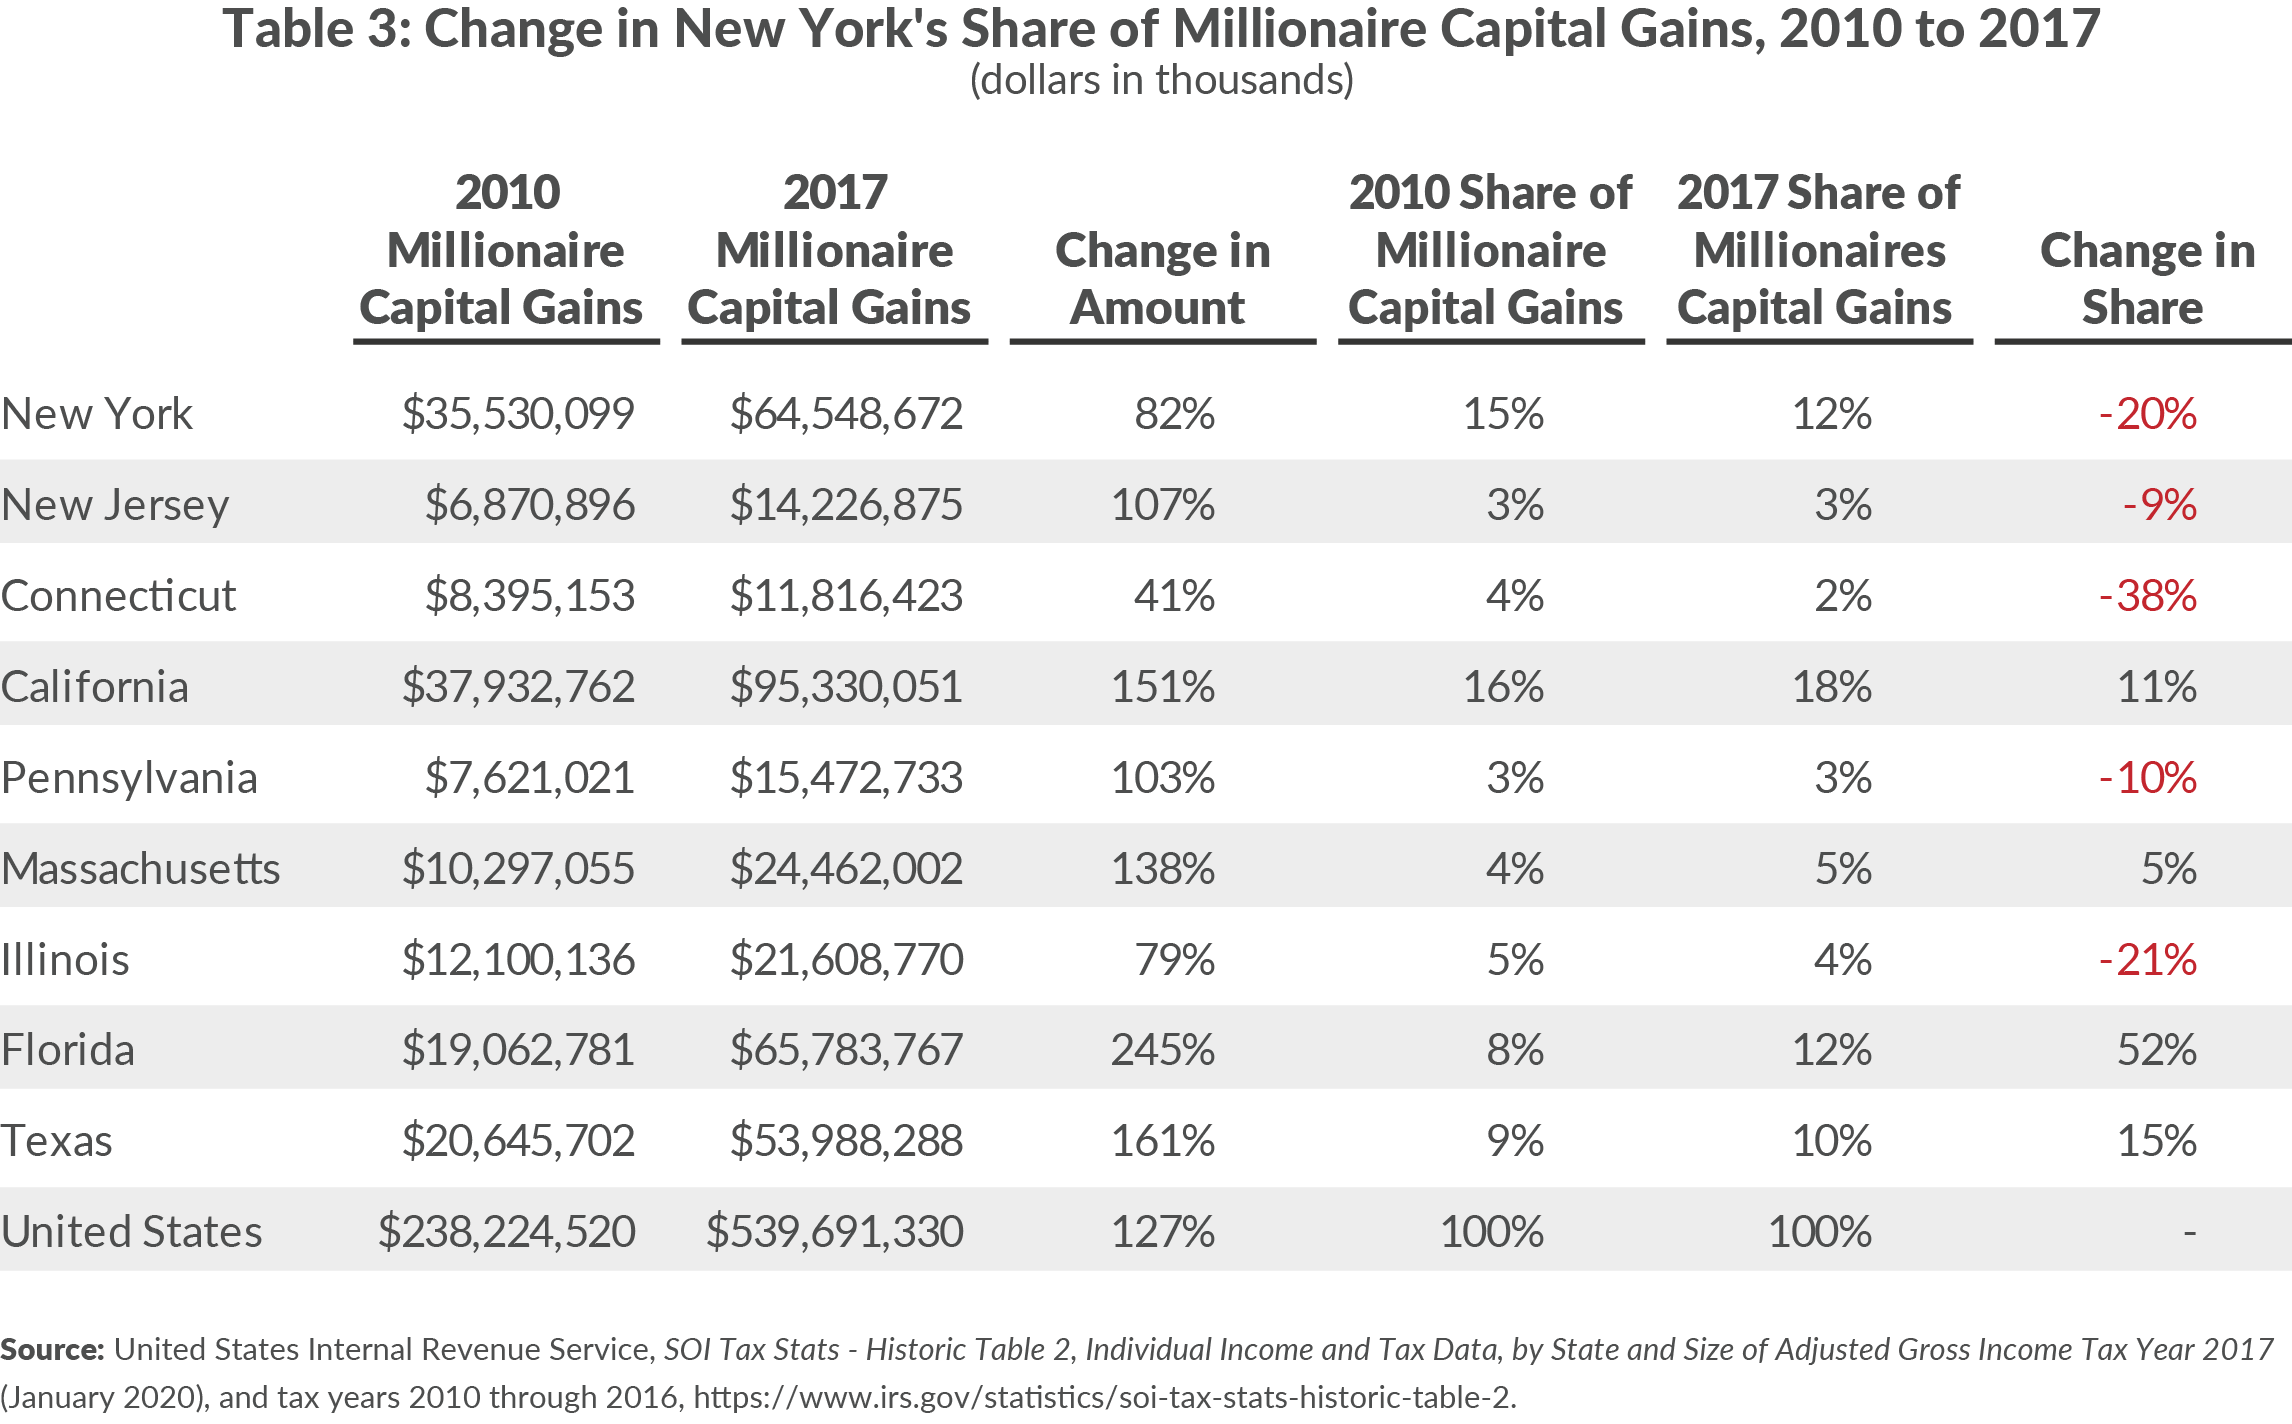 Table 3: Change in New York's Share of Millionaire Capital Gains, 2010 to 2017